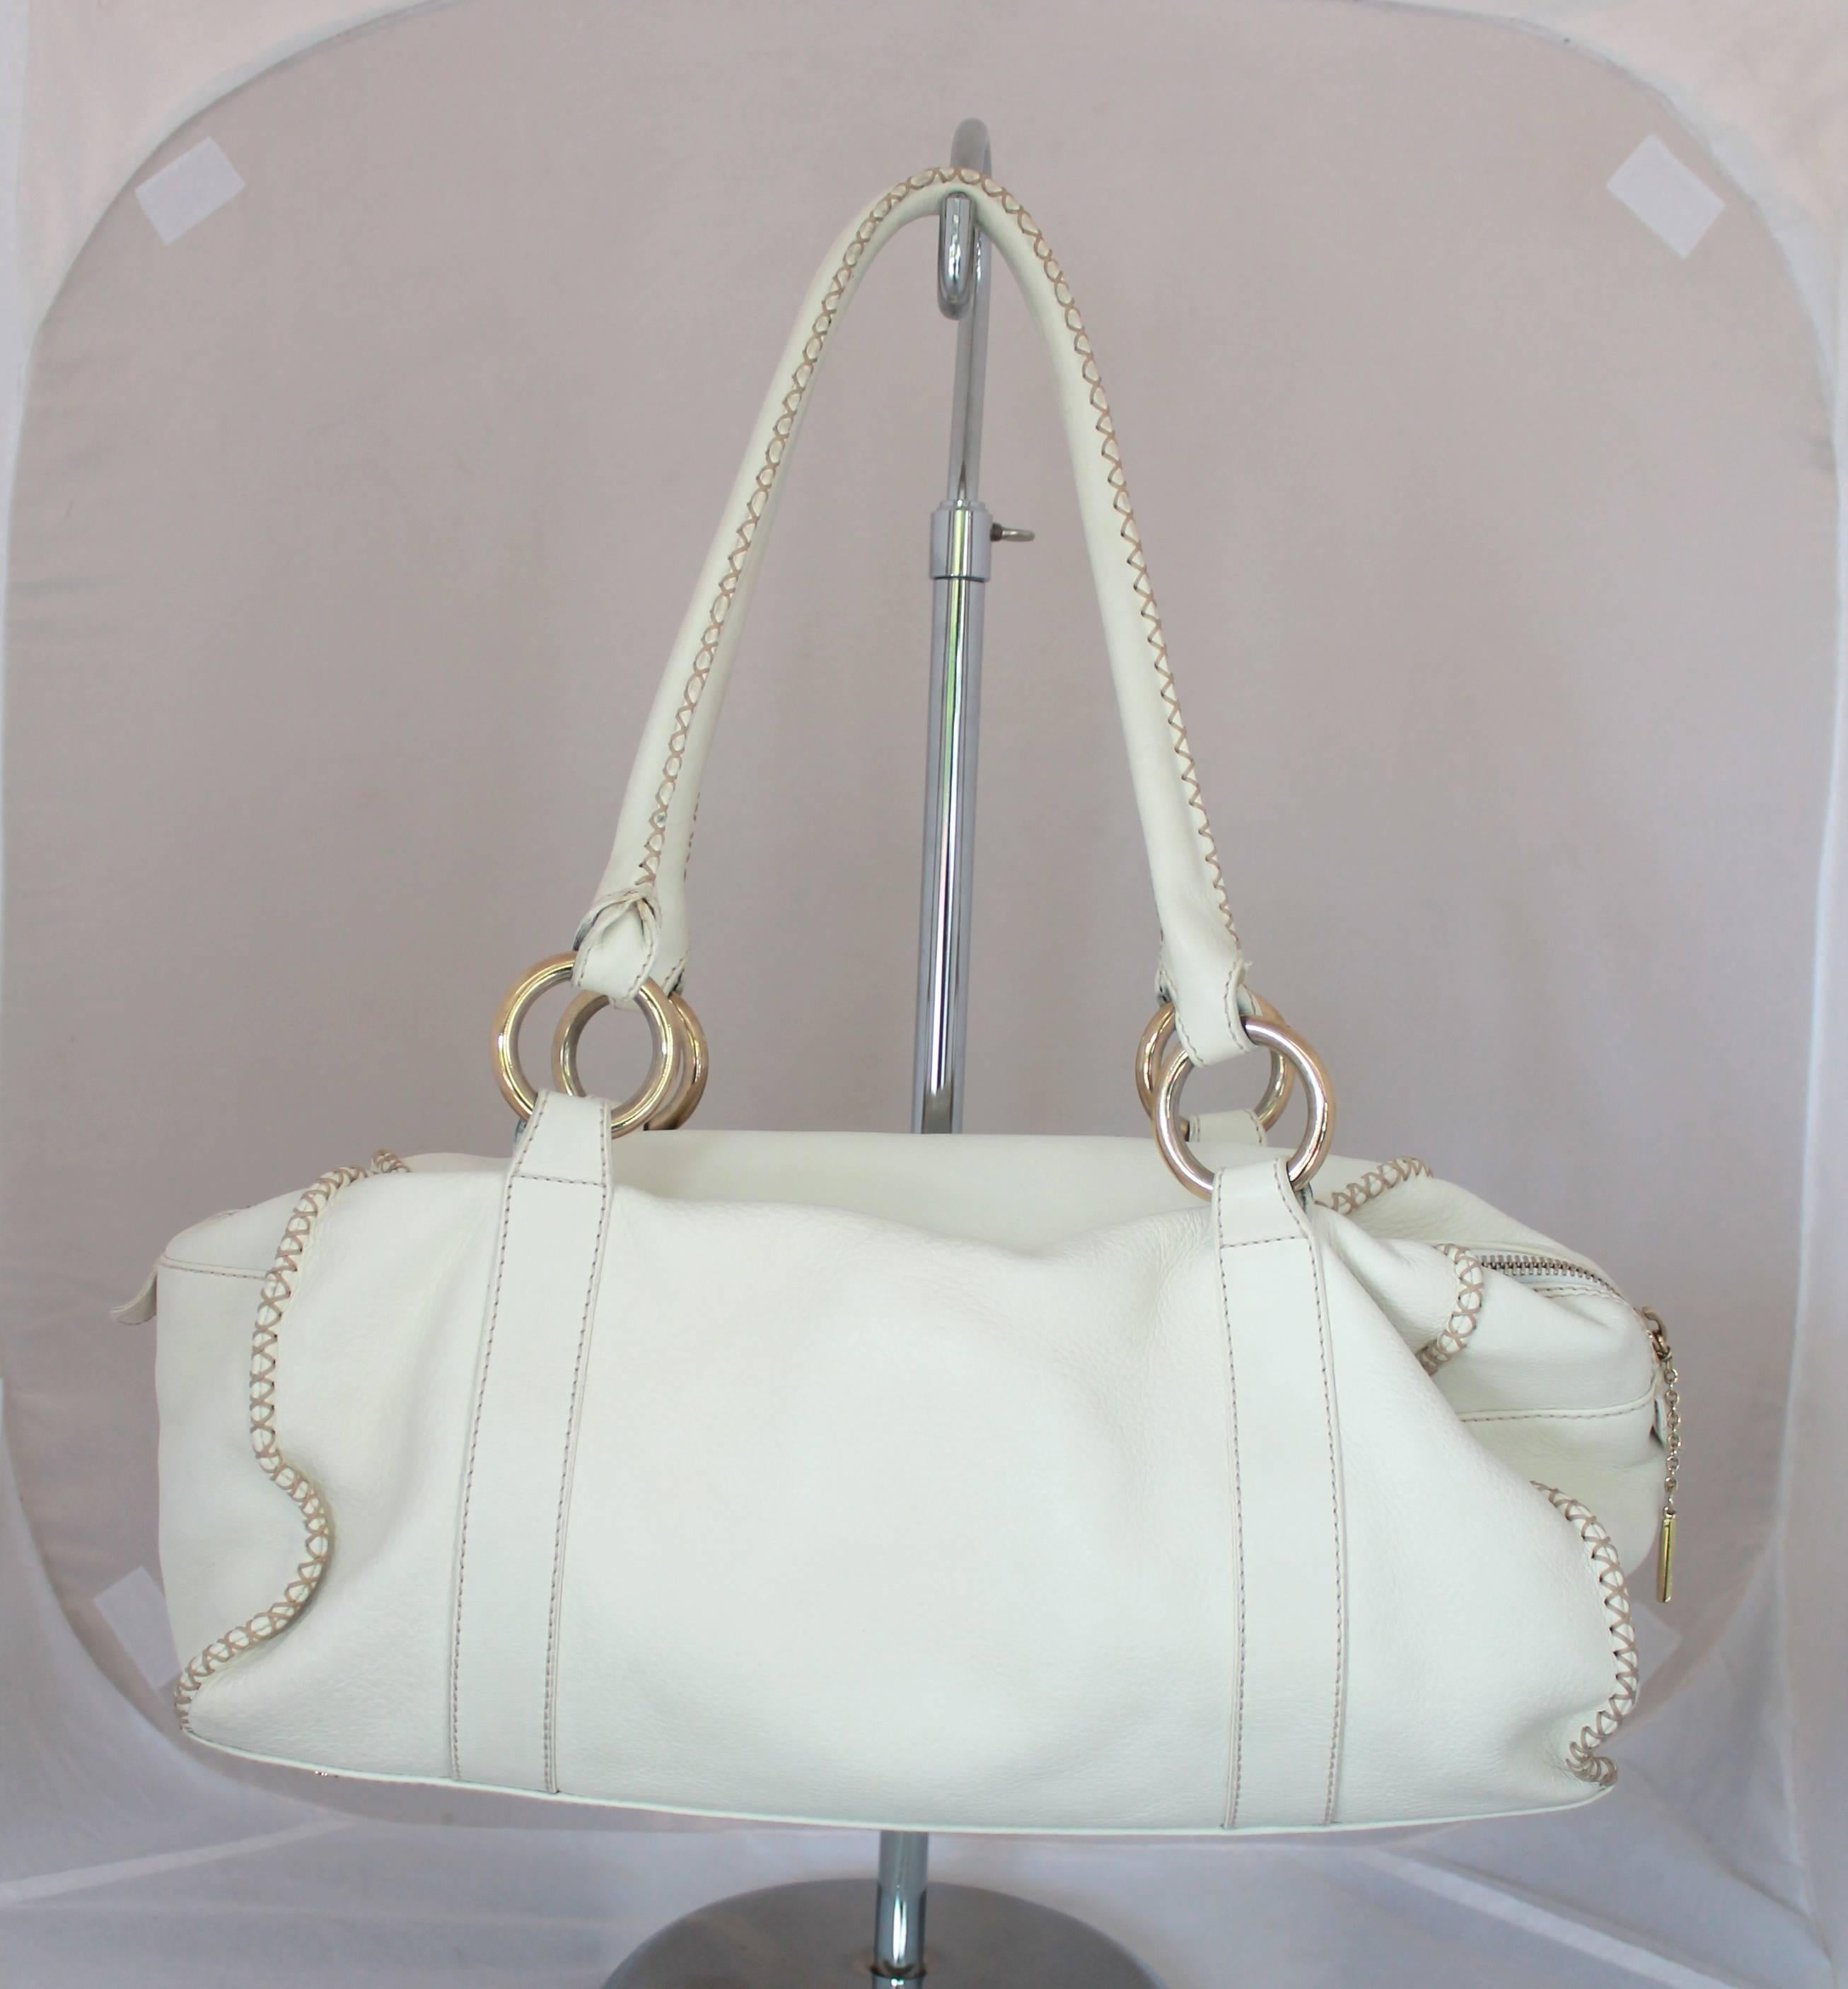 Emanuel Ungaro Ivory Leather Shoulder Bag

This ivory leather shoulder bag has beige stitched trim with front center pockets and a center zip. It has gold hardware and is in very good condition with minor staining on the handle. 